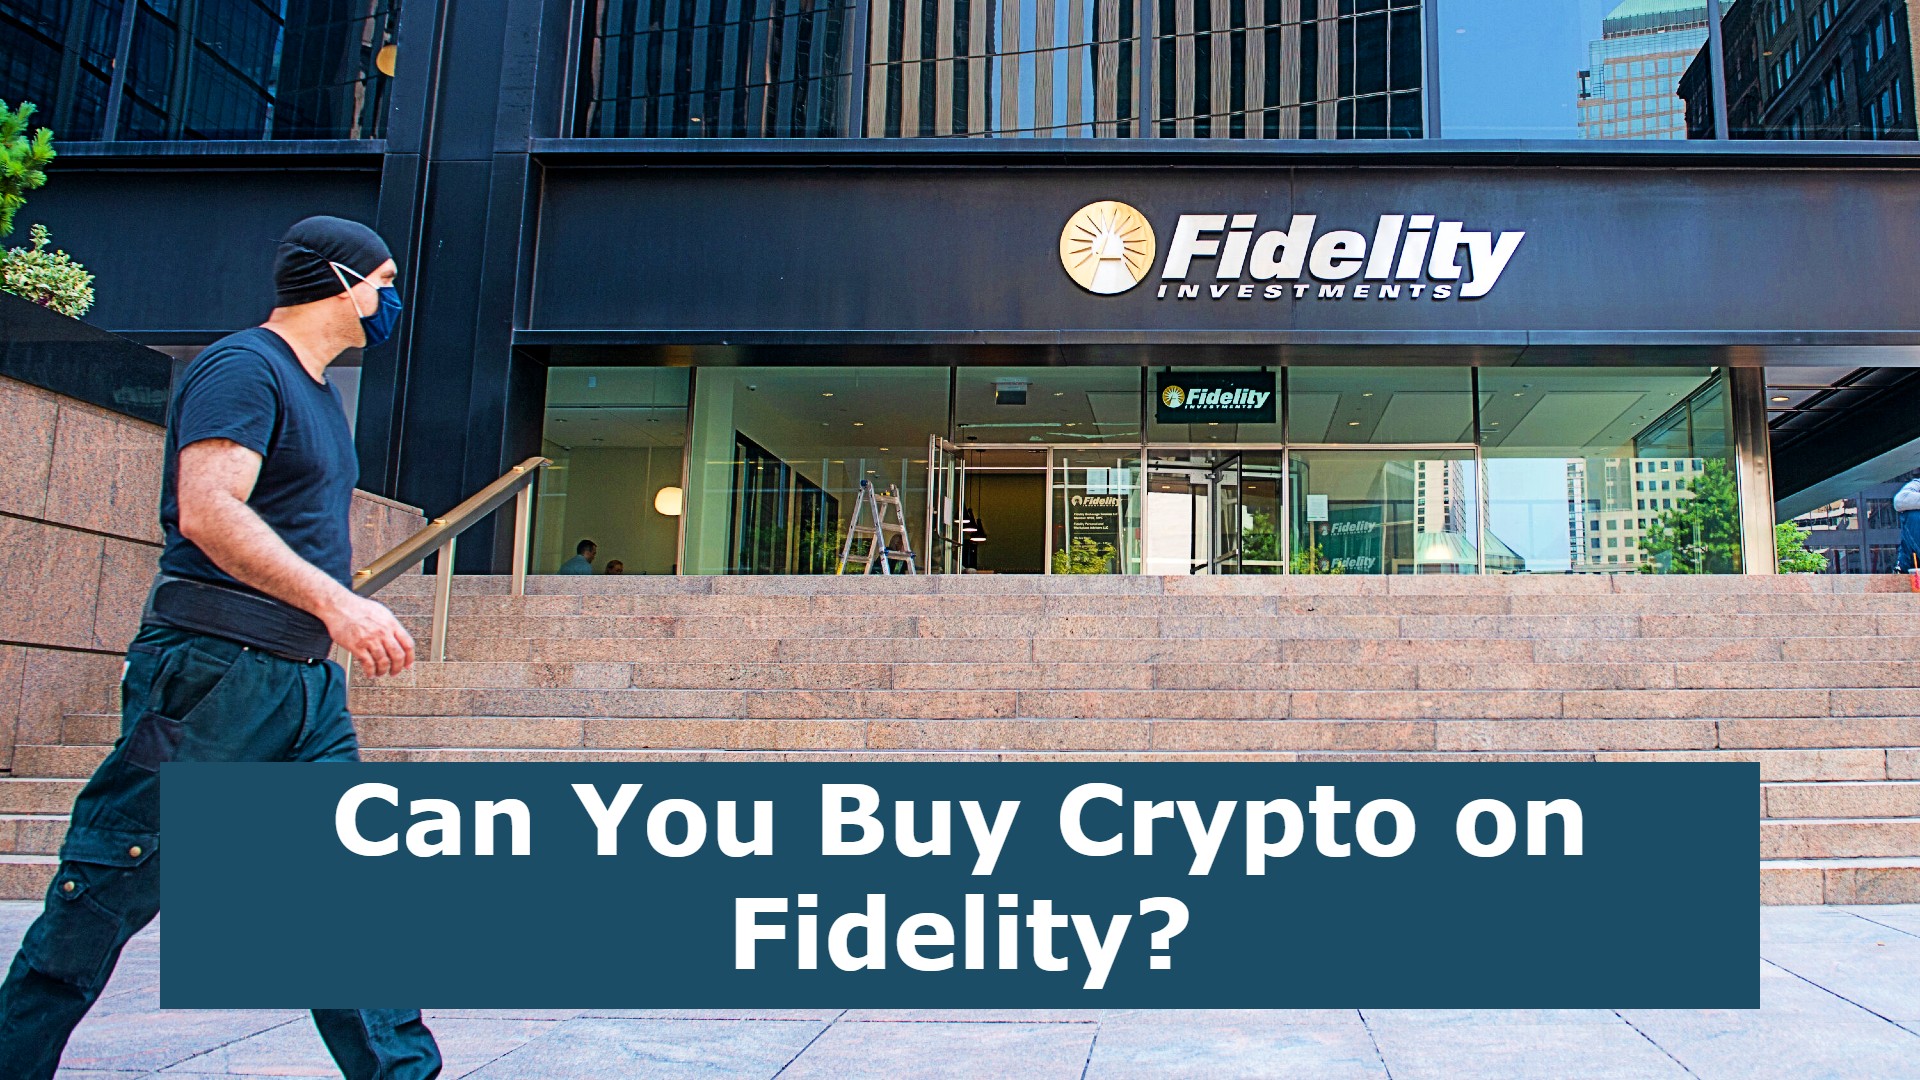 Can You Buy Crypto on Fidelity?